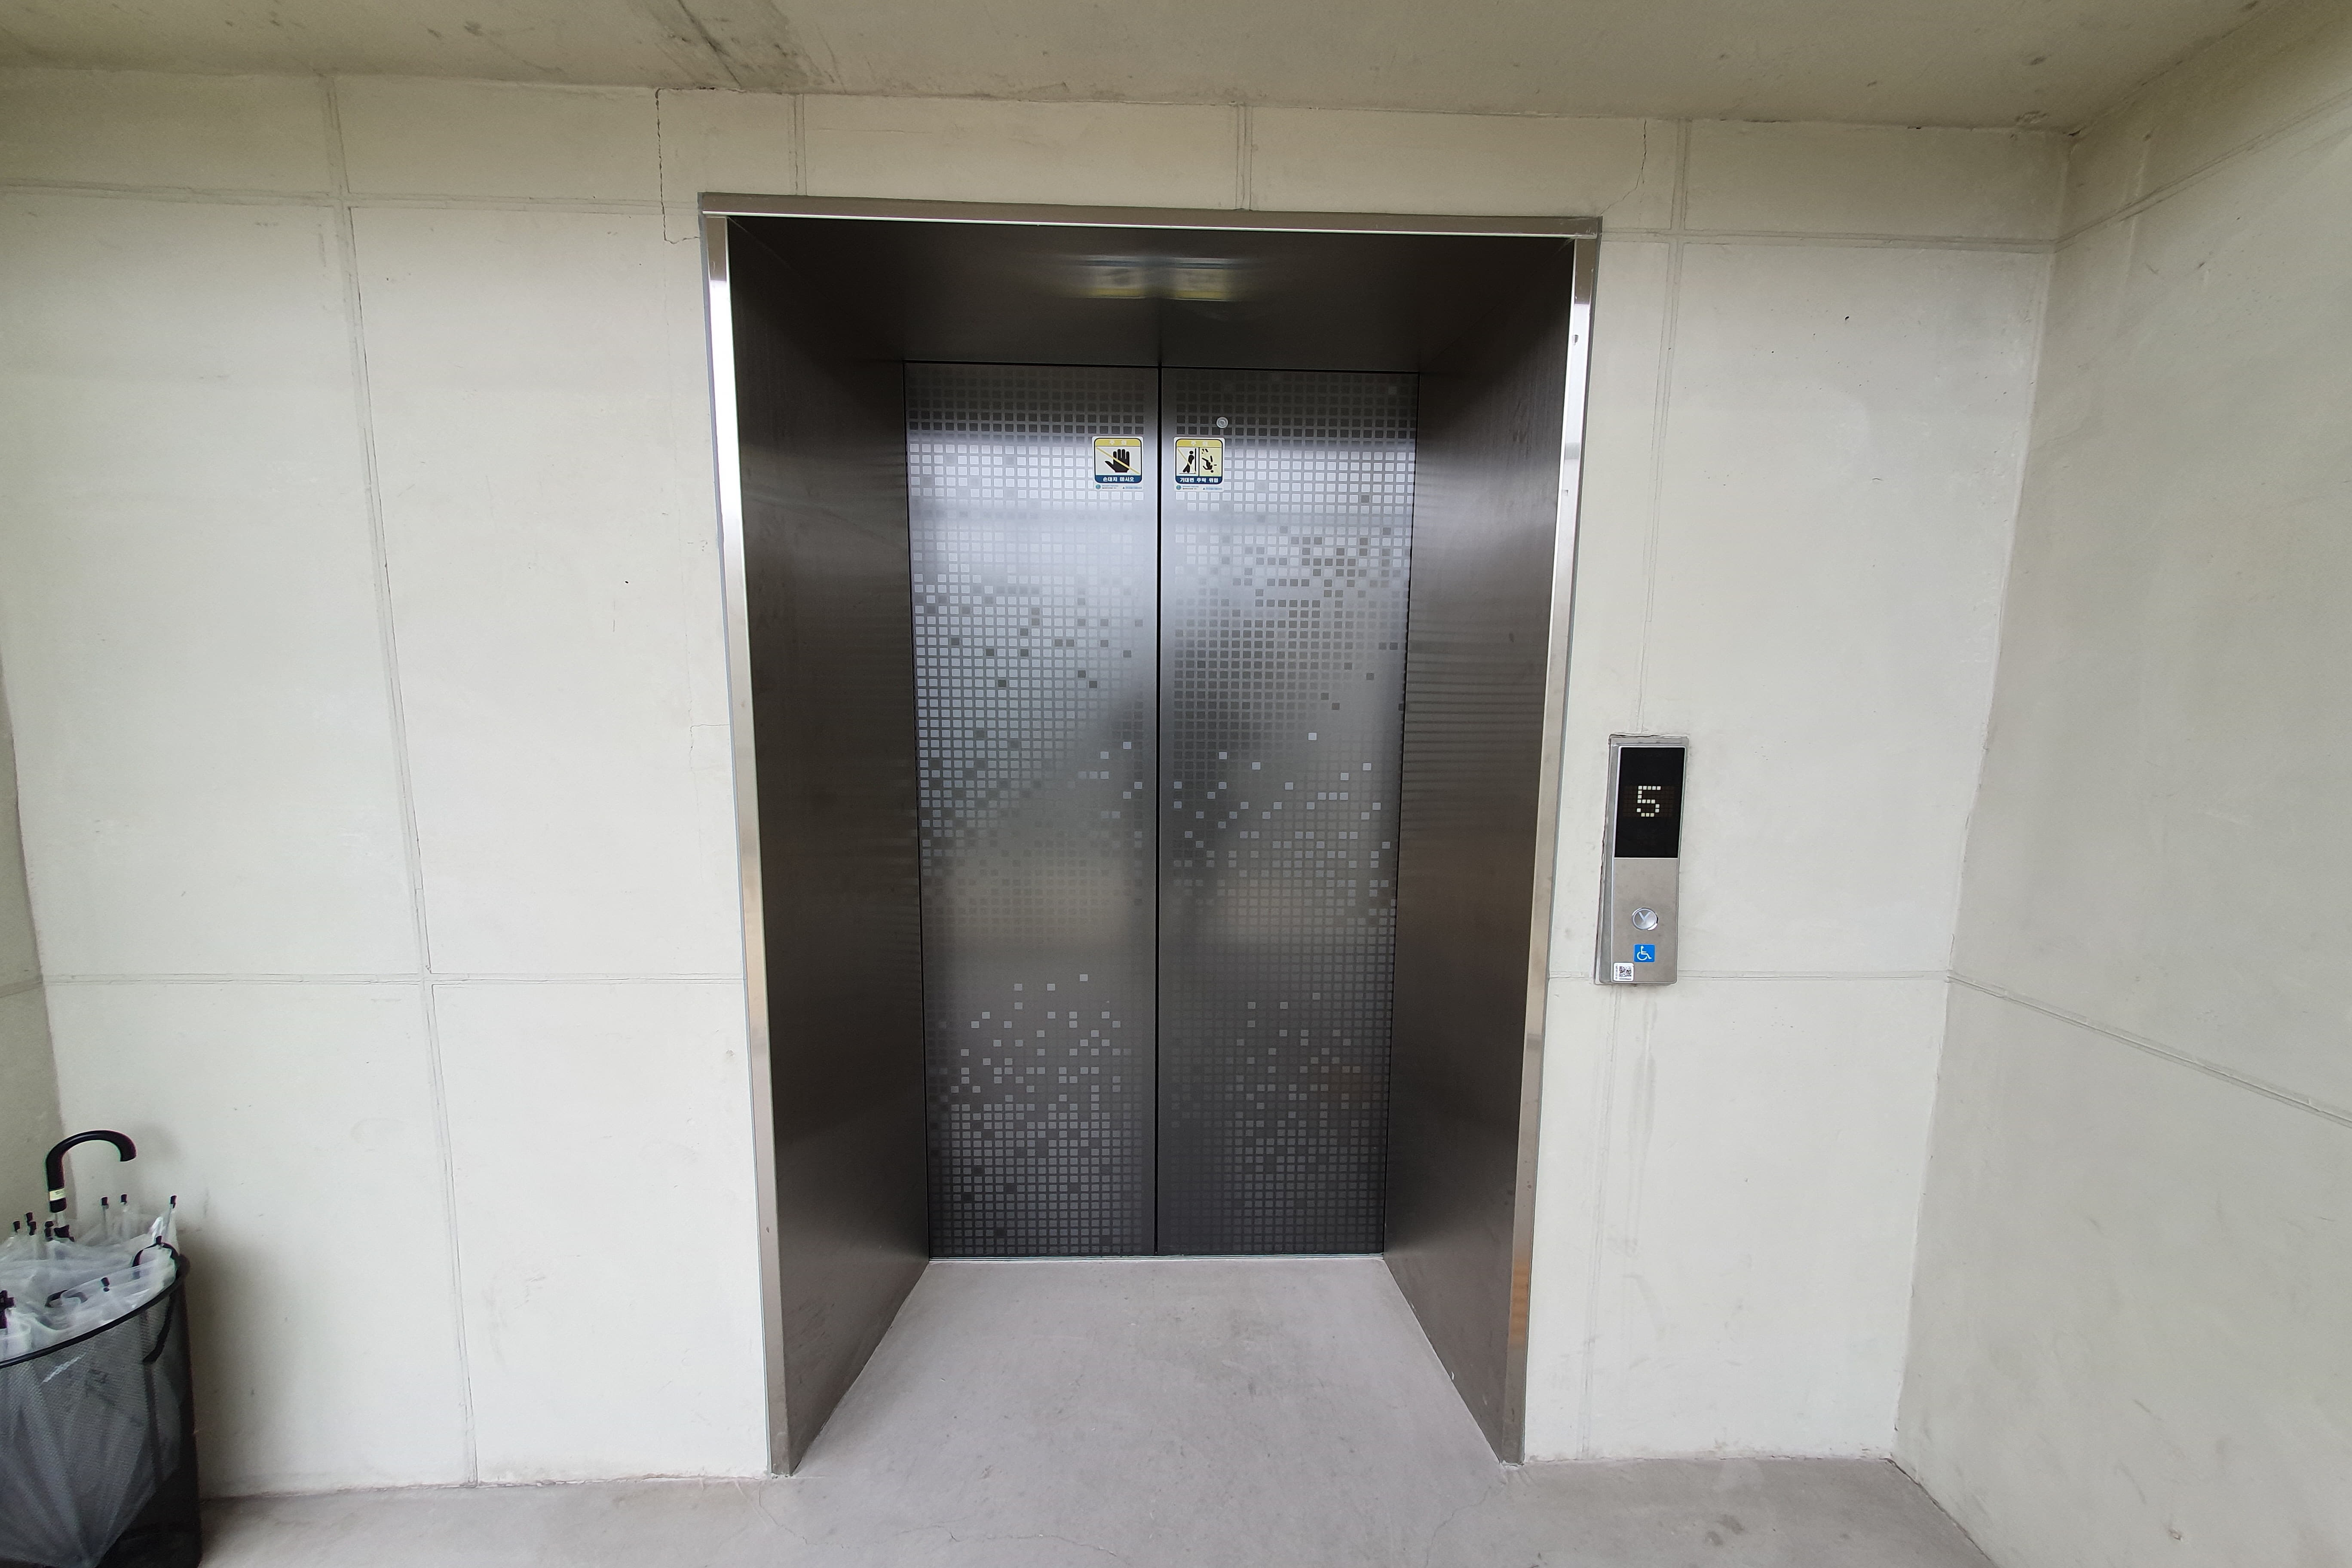 Elevator0 : An elevator with closed doors